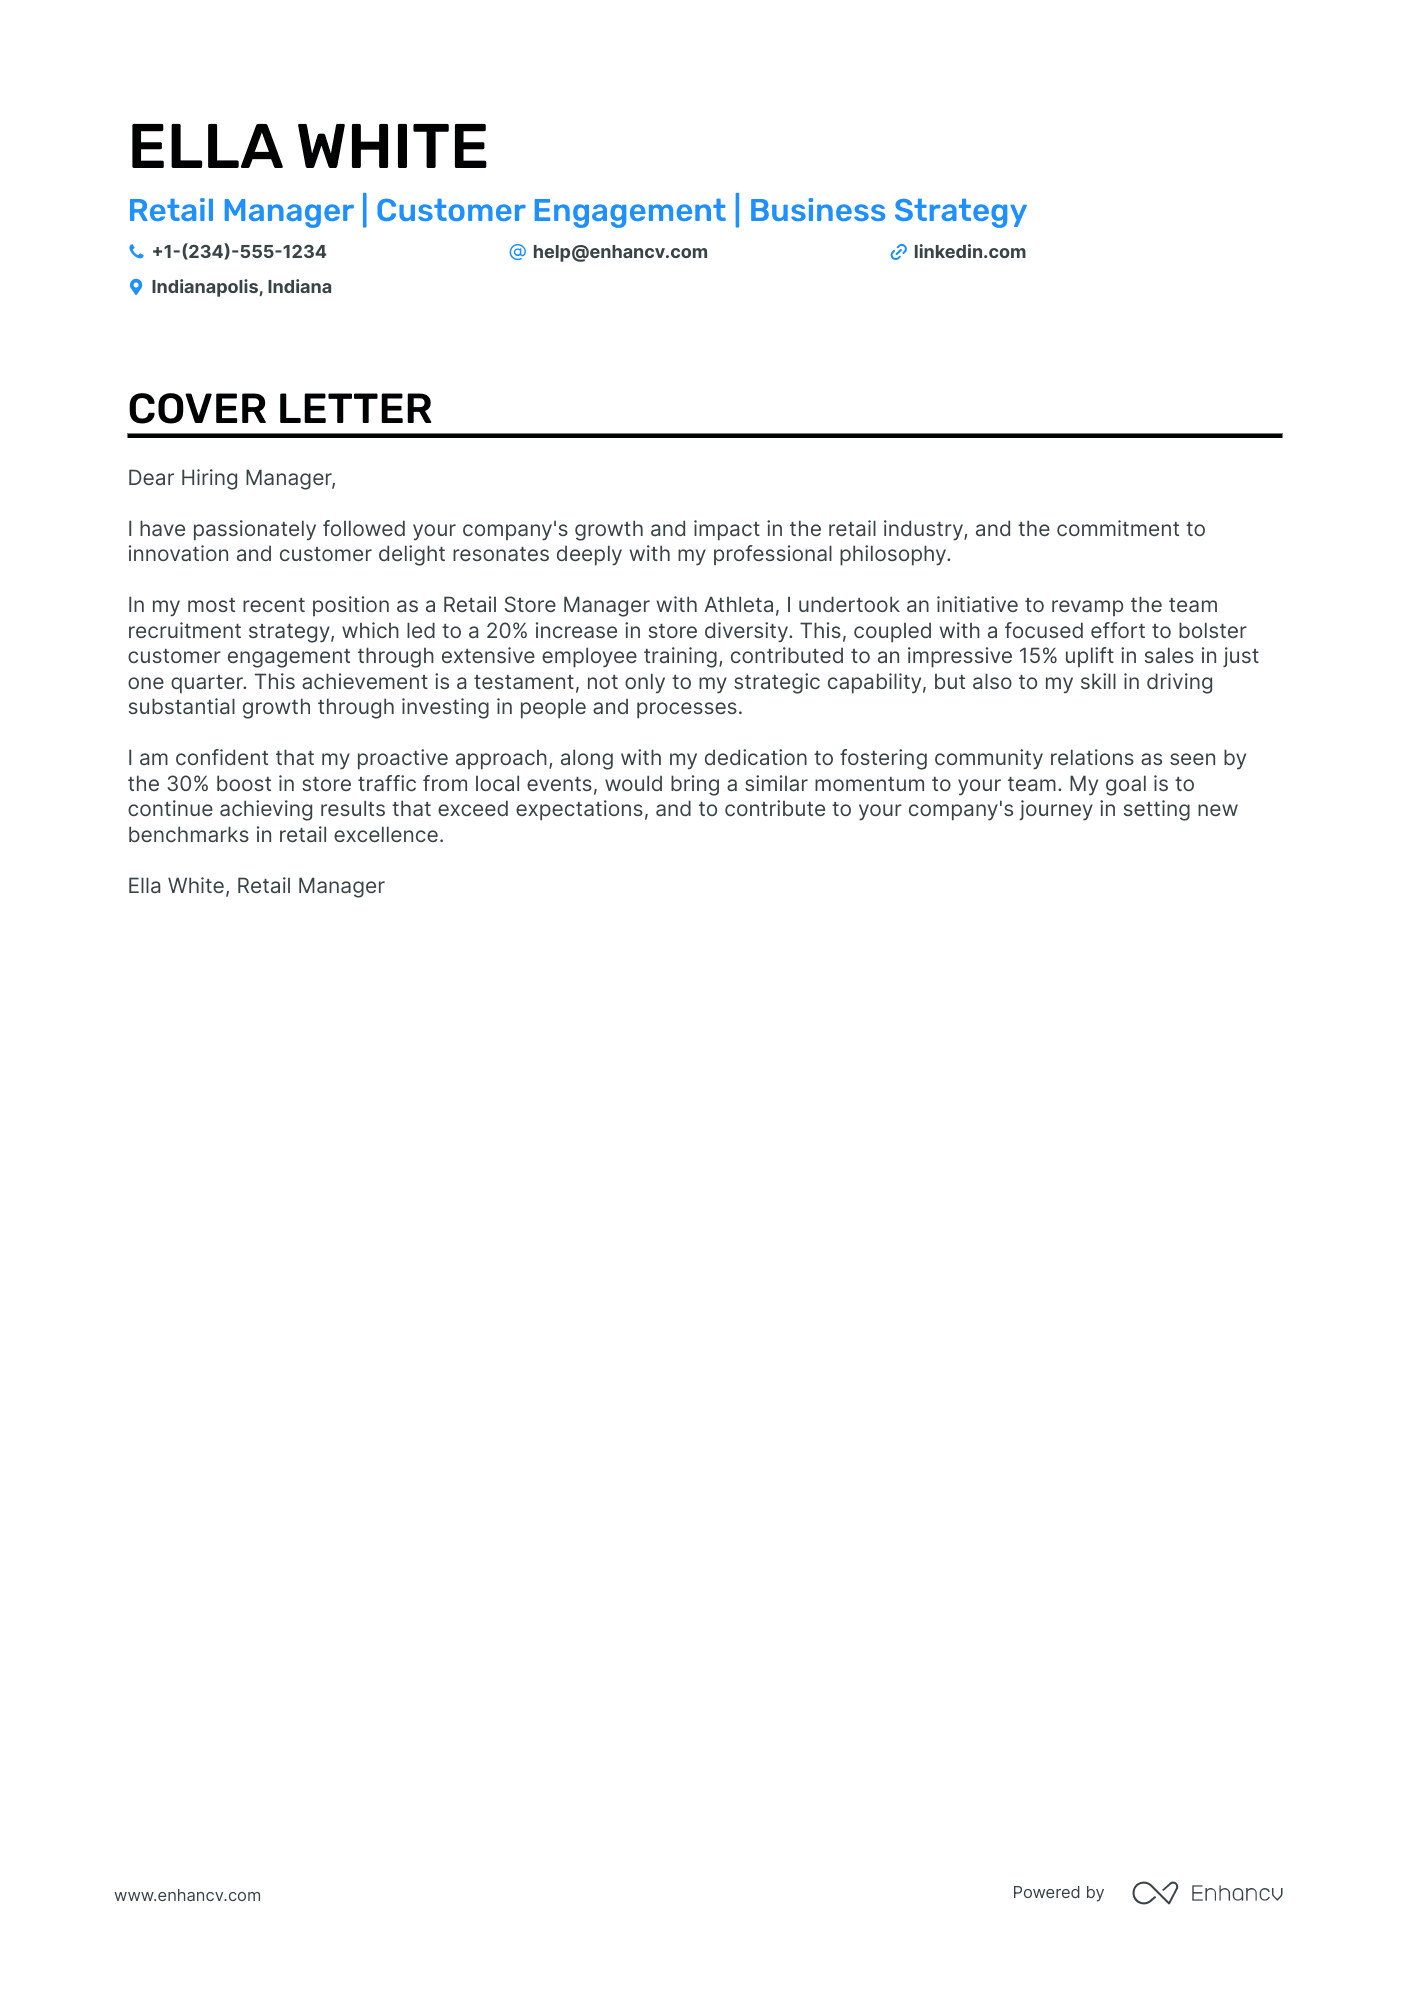 Coaching cover letter